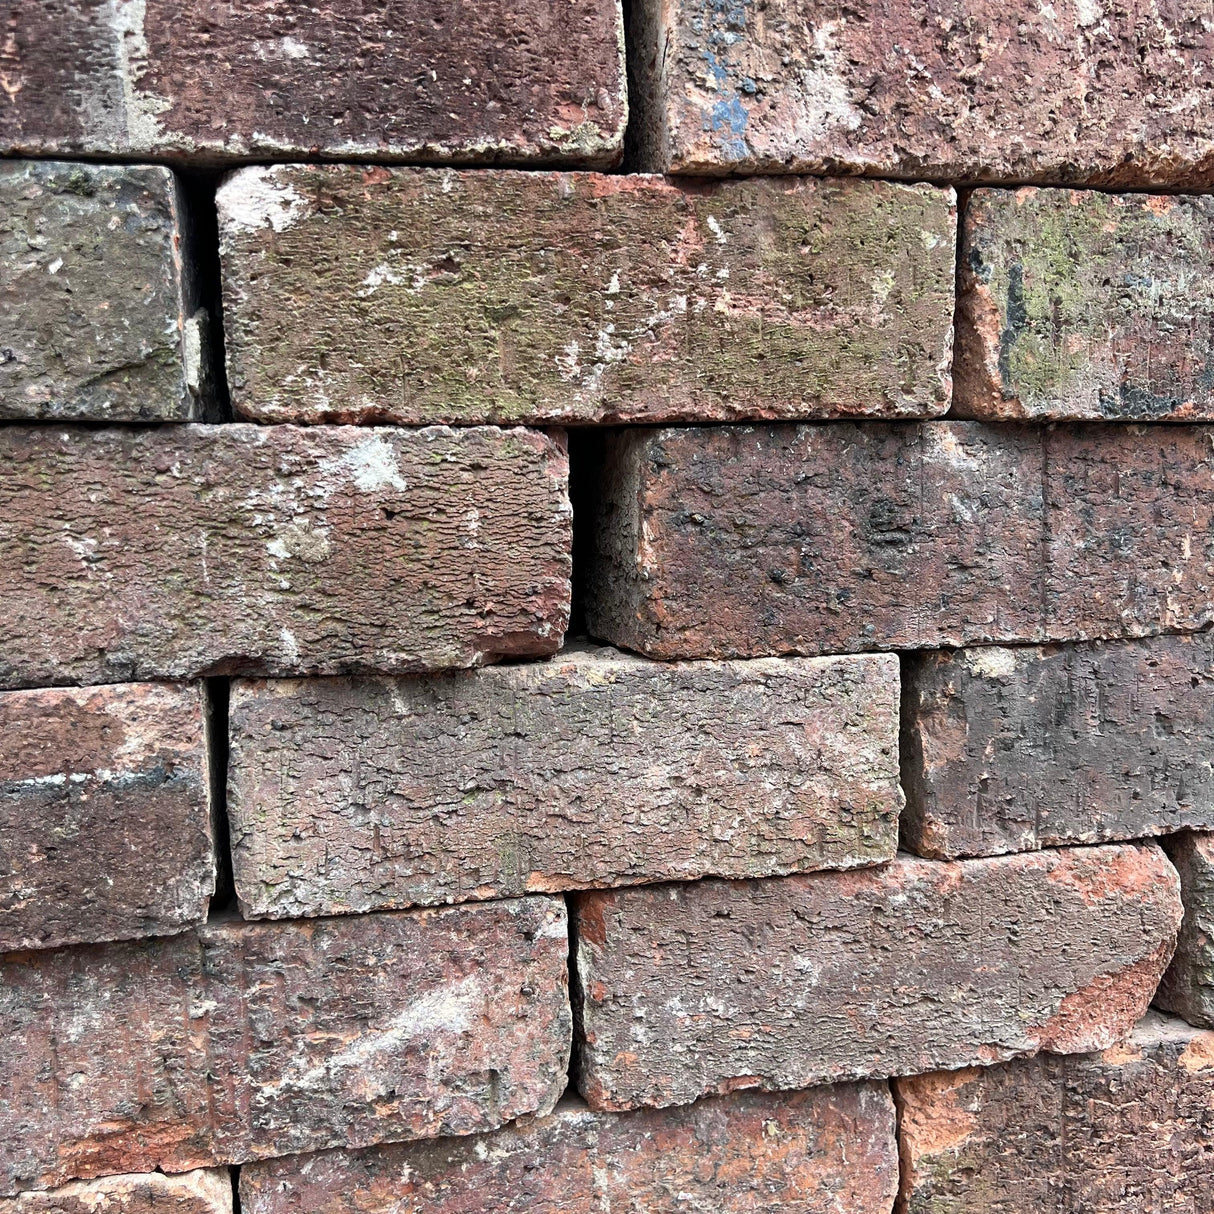 Reclaimed Rough Textured Imperial Bricks | Pack of 250 Bricks | Free Delivery - Reclaimed Brick Company